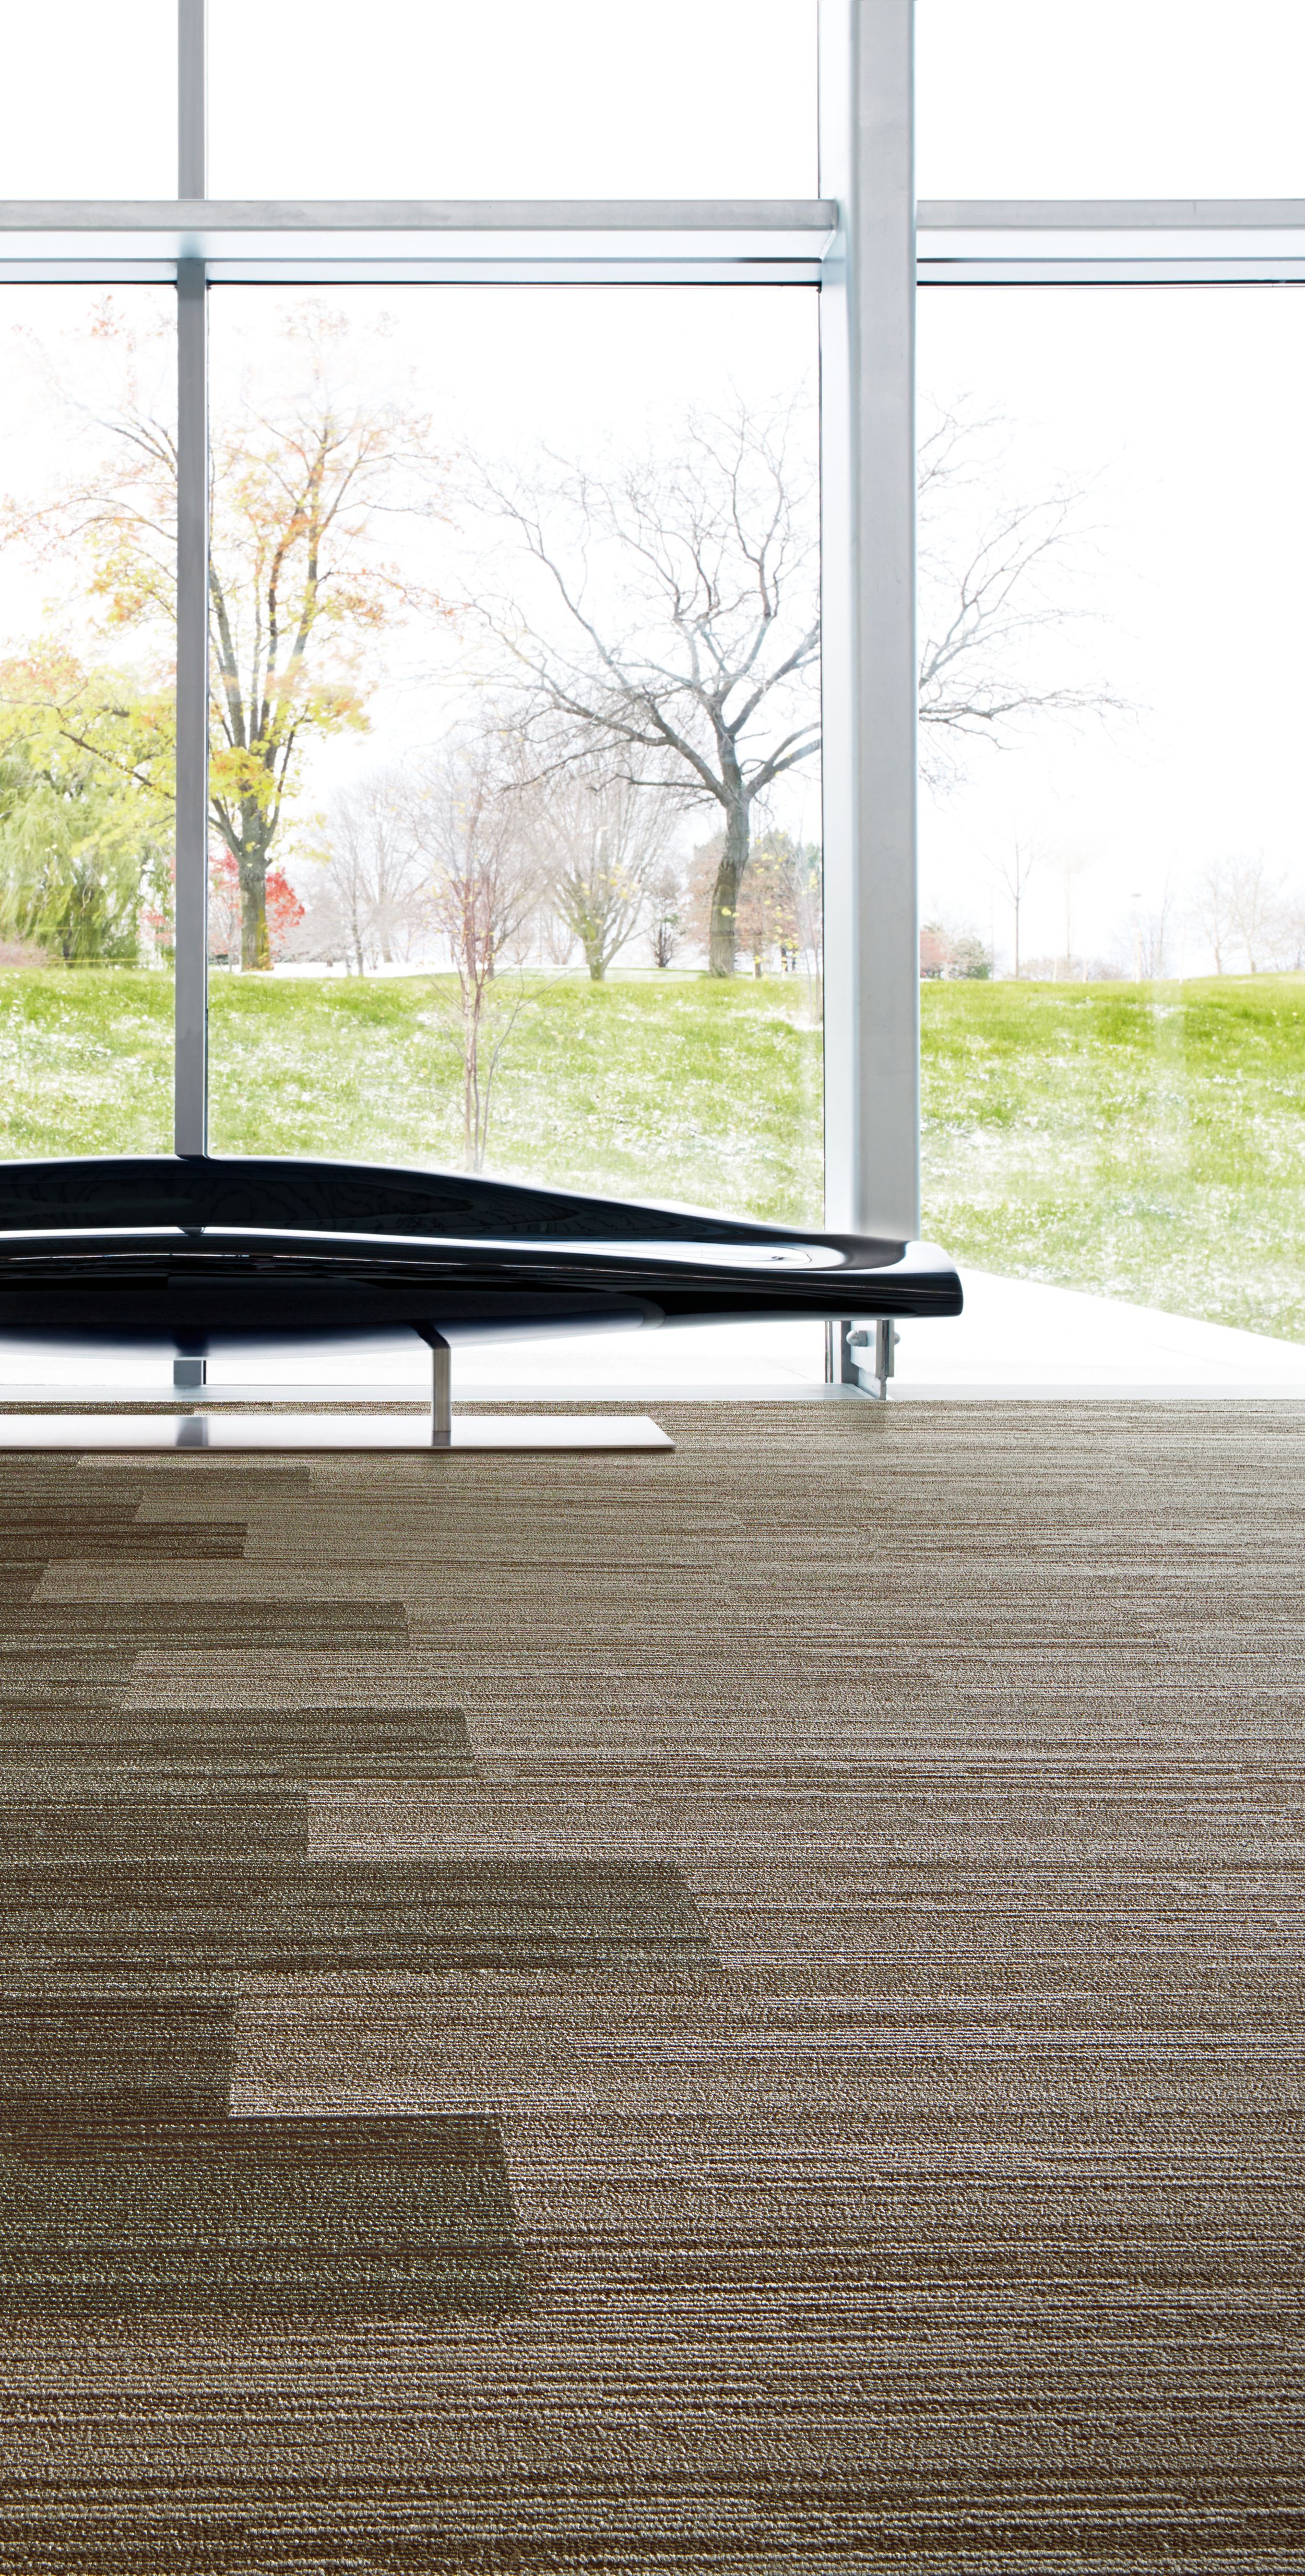 Interface Progression III plank carpet tile in room with seating area by window numéro d’image 9